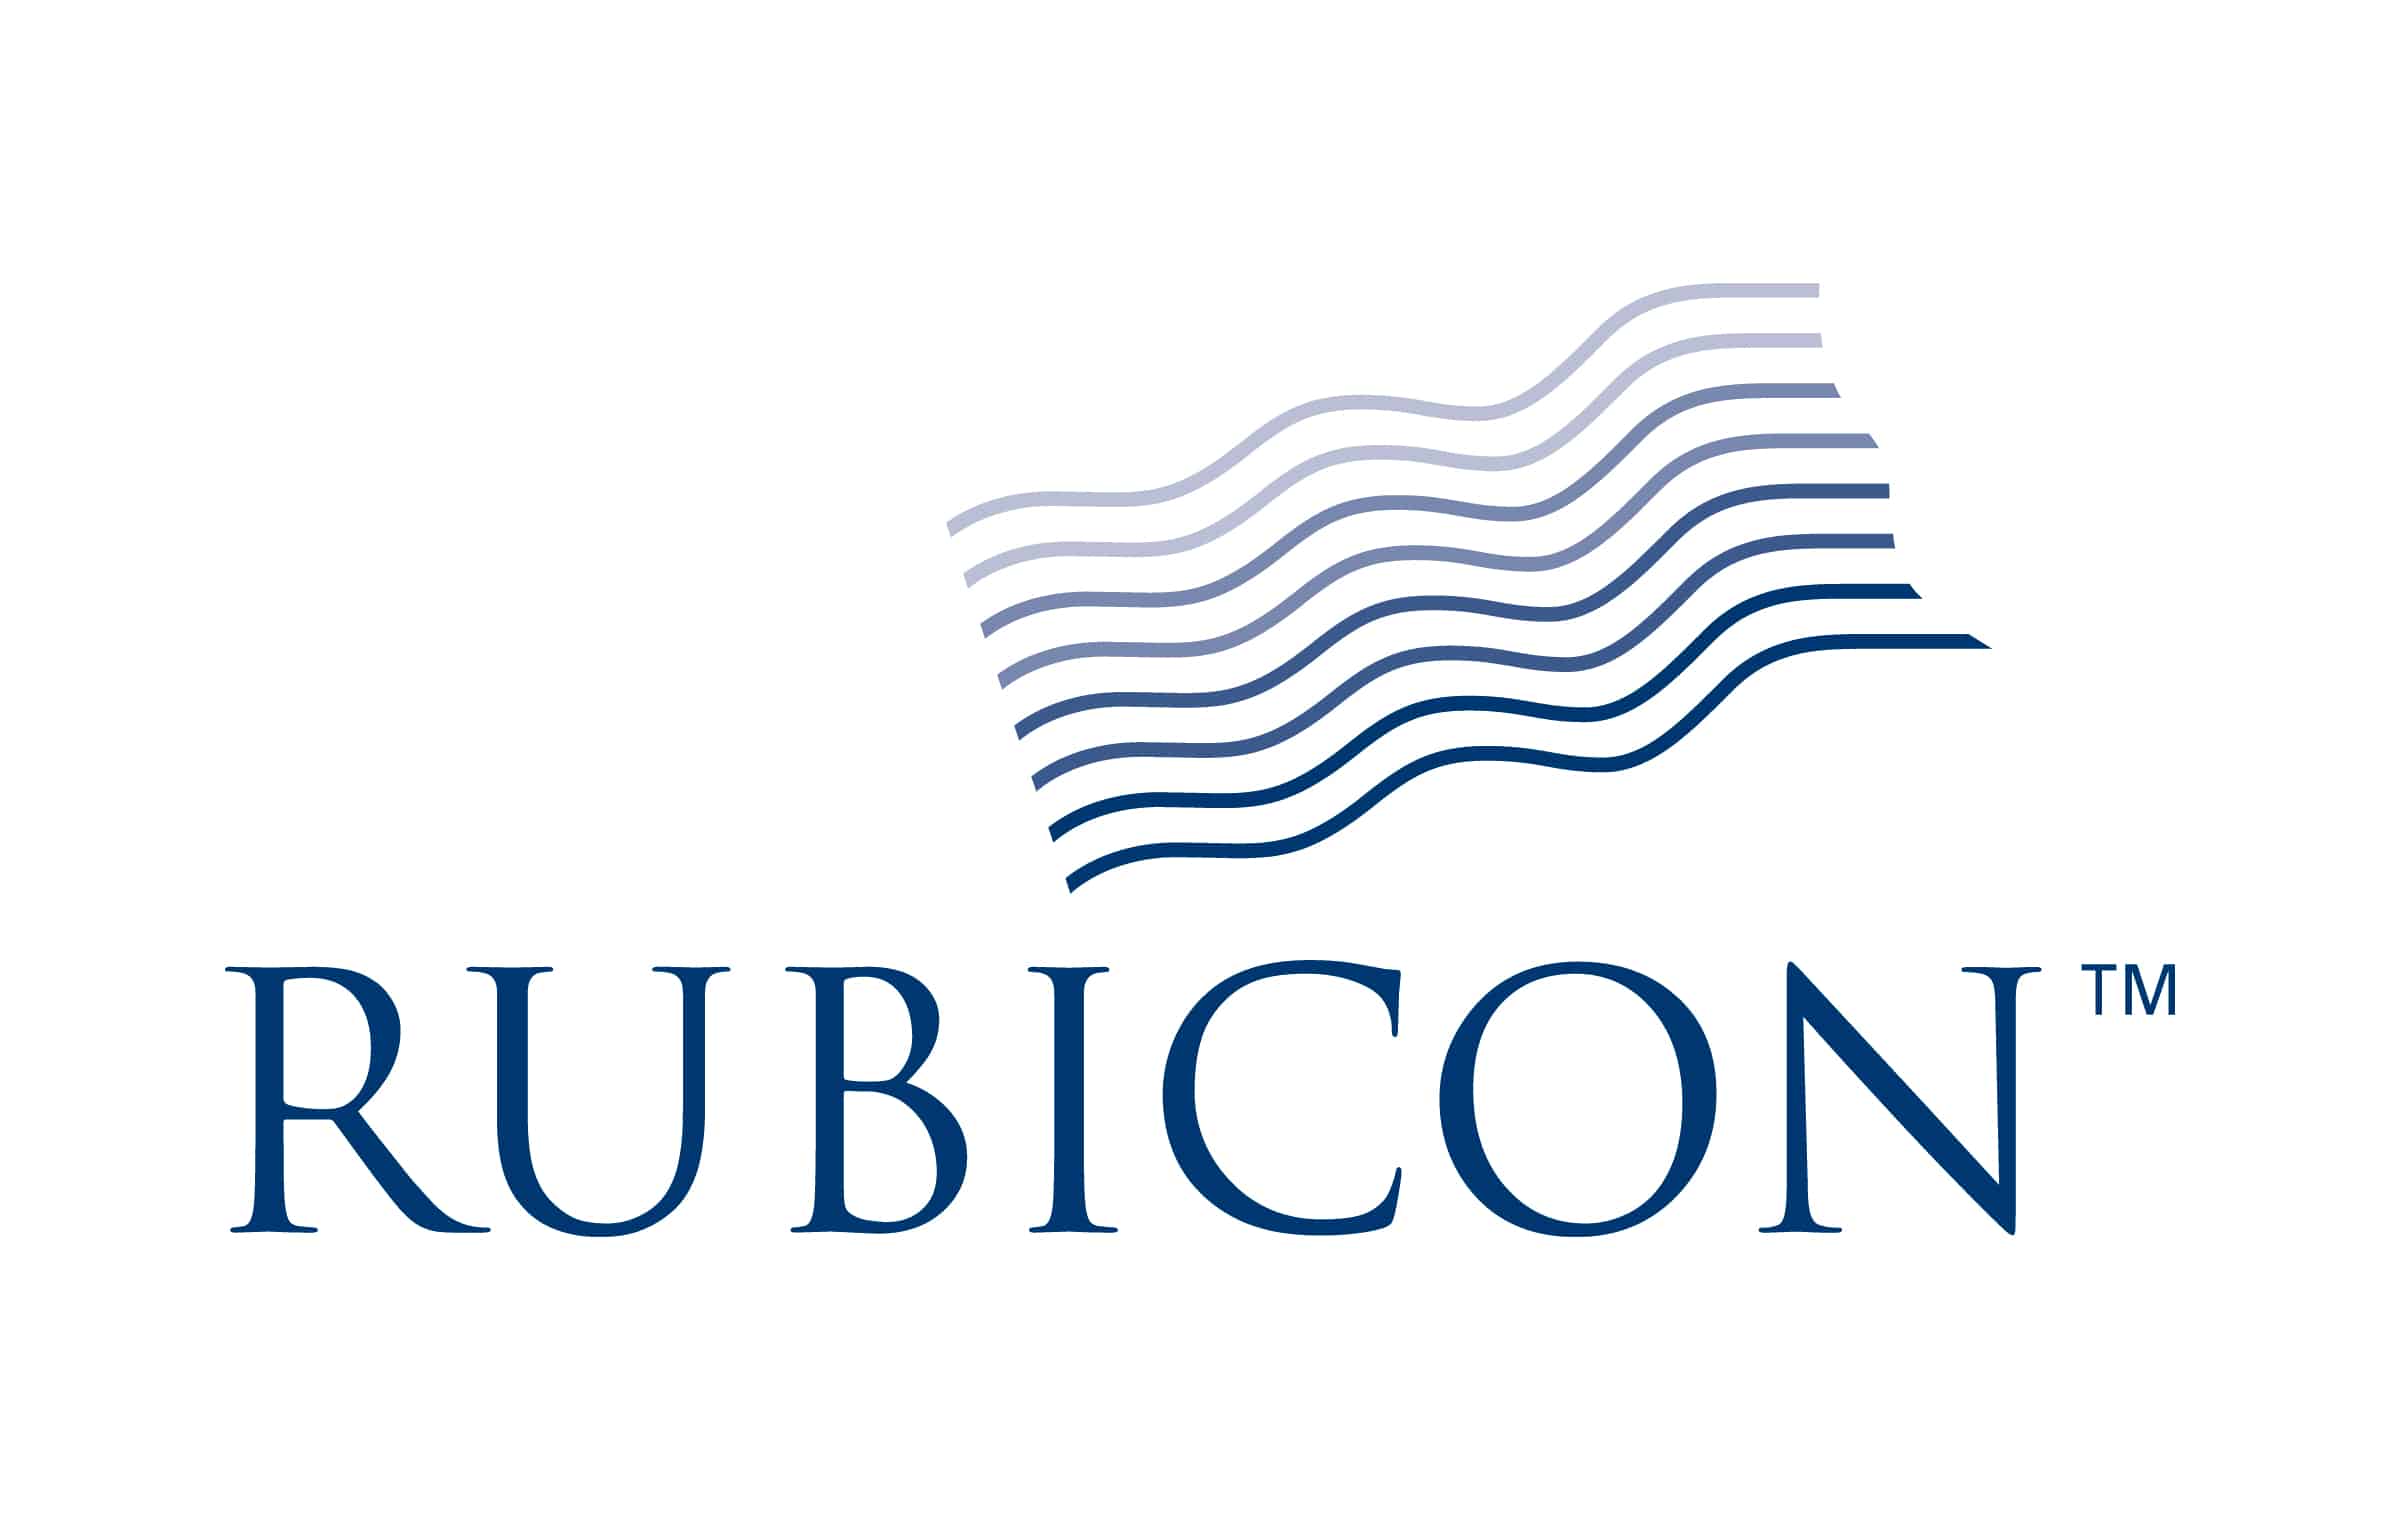 Rubicon Water